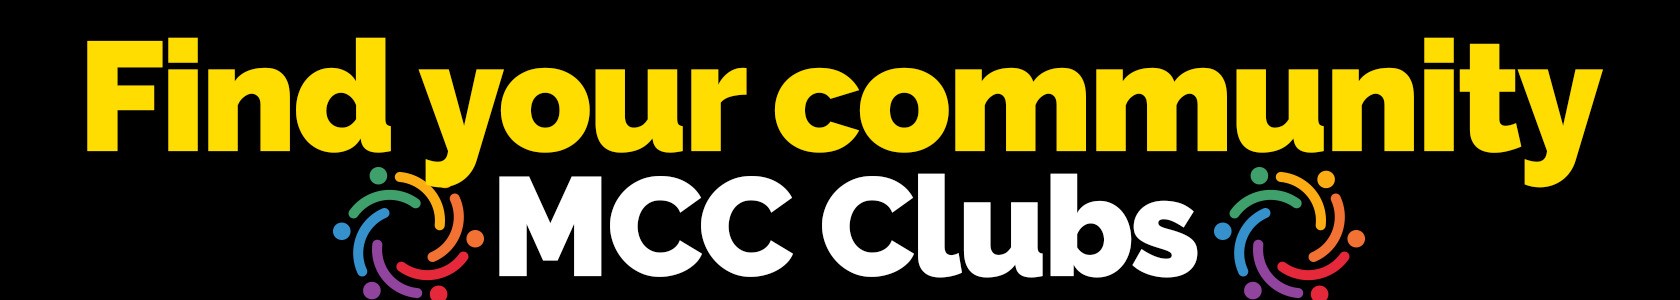 Find your community - MCC Clubs banner